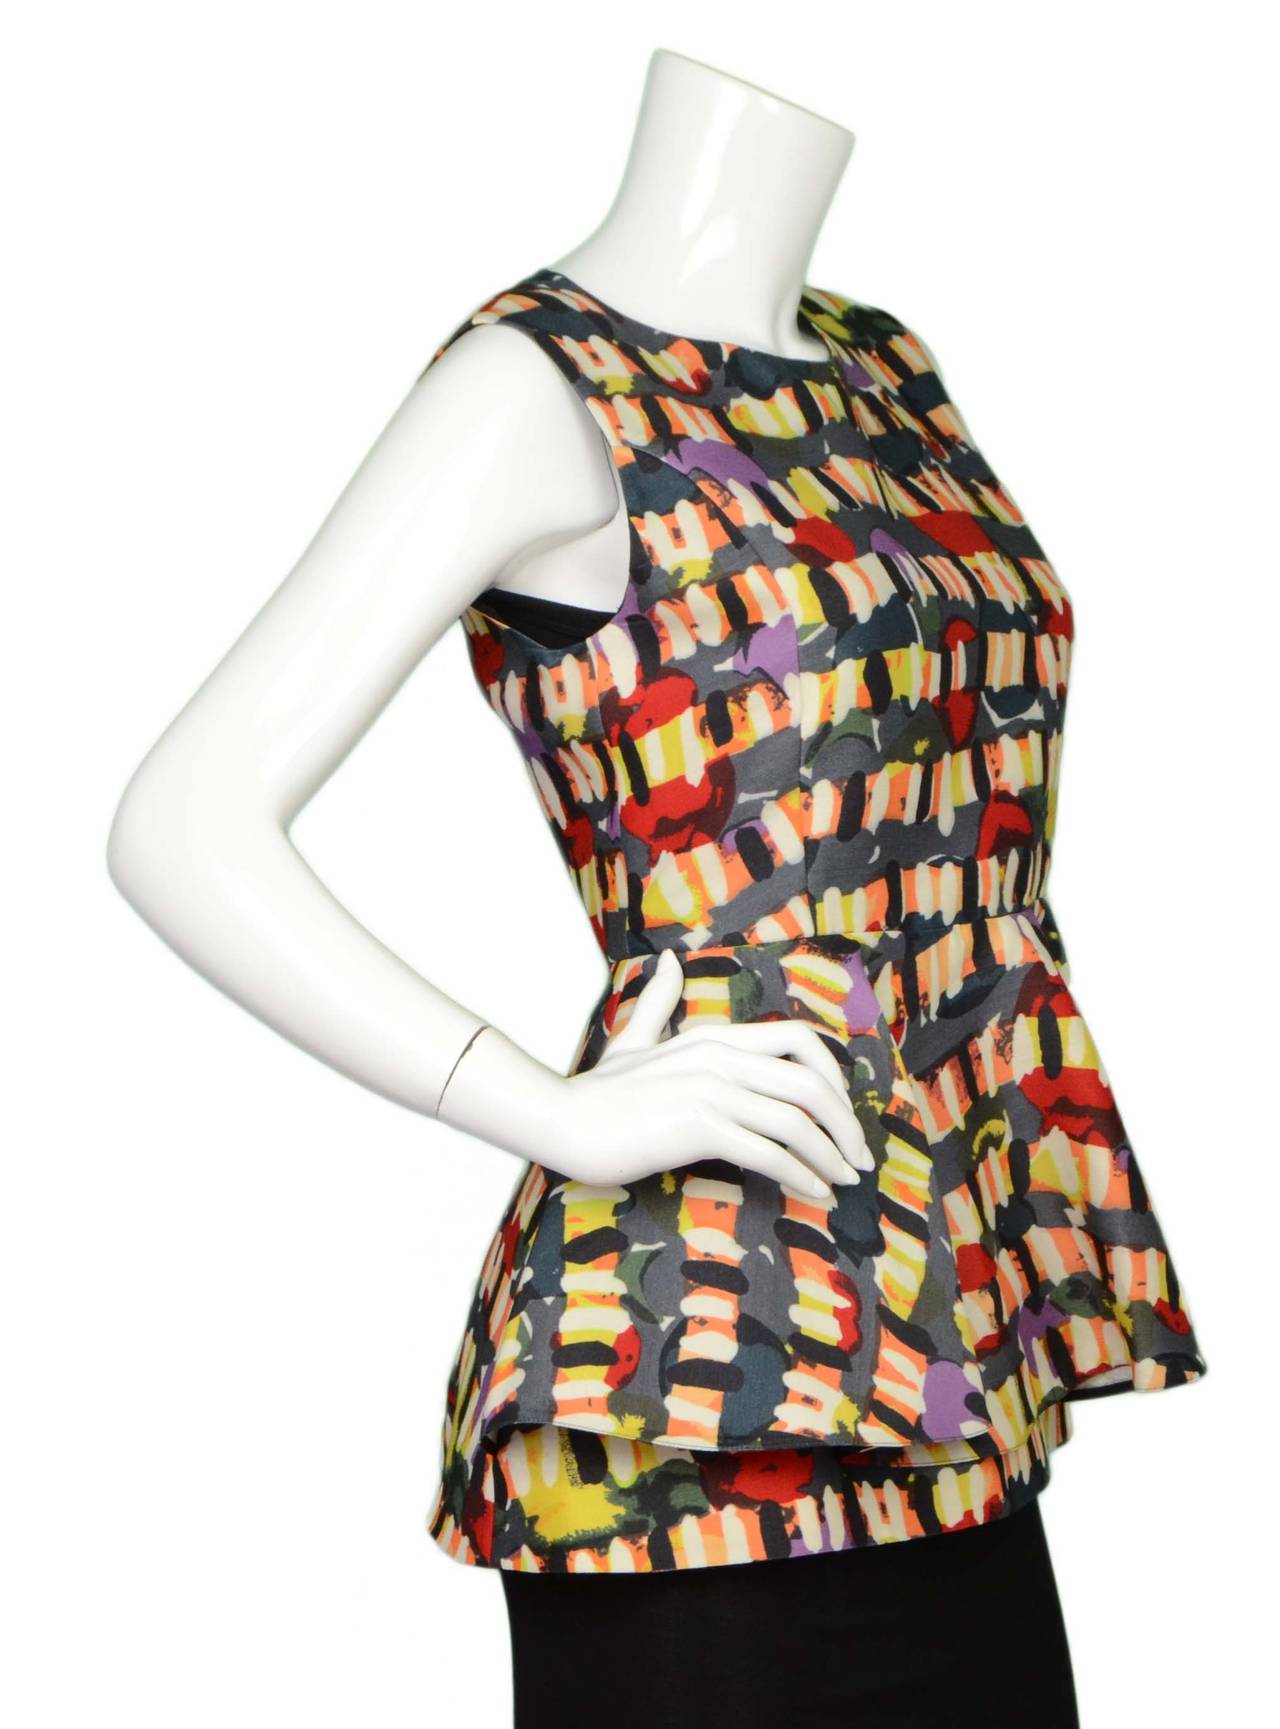 Marni Multi-Colored Sleeveless Peplum Top 
Features brush stroke-style print throughout
Made In: Italy
Color: Multi-colored
Composition: 52% wool, 48% silk
Lining: Black, 52% viscose, 48% nylon-blend
Closure/Opening: Back center